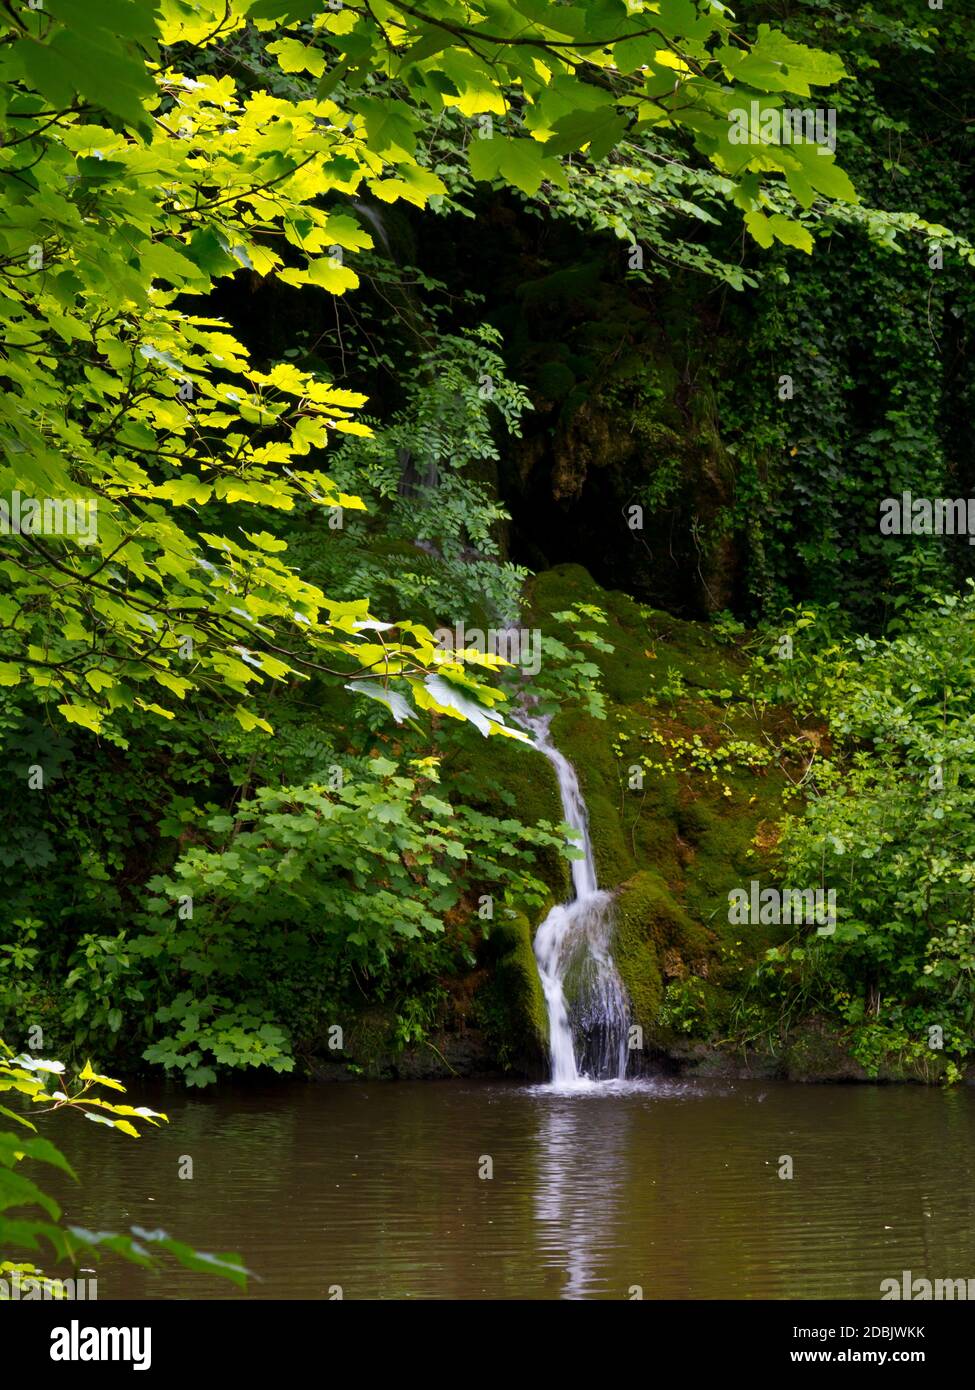 The Cascades Waterfall running into the River Derwent at Matlock Bath a popular village in the Derbyshire Peak District England UK Stock Photo